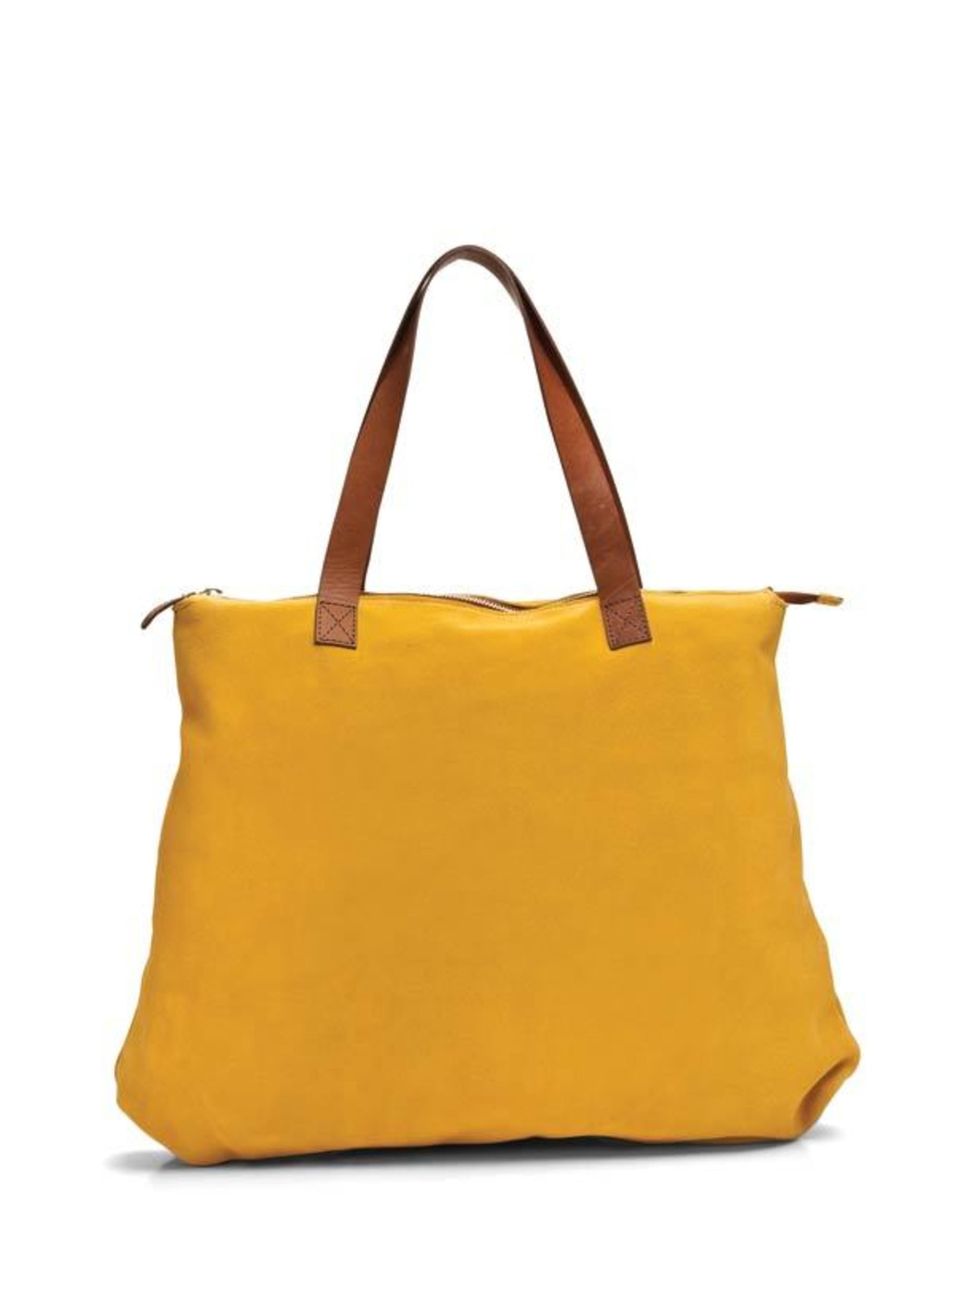 <p>This roomy leather tote will make a chic everyday companion and add a refreshing splash of colour to warm-weather looks Veja leather tote, £180, at Darkroom, for stockists call 0203 355 8355</p>